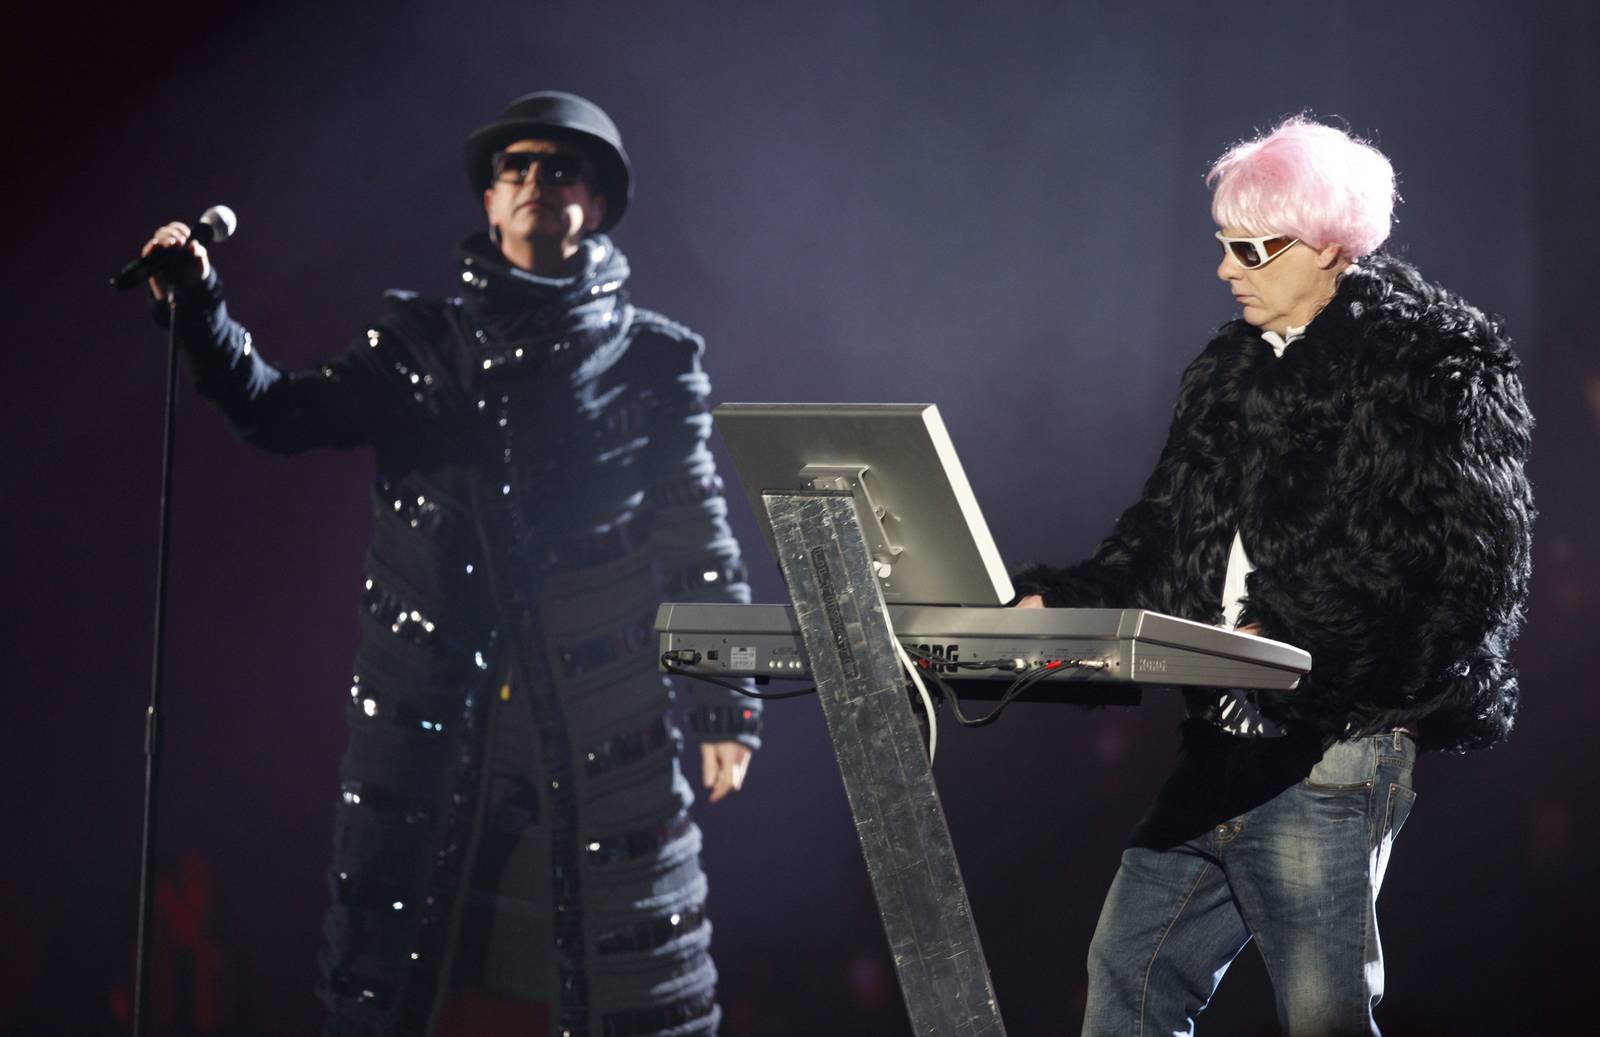 Four decades in, the Pet Shop Boys know the secret to staying cool ...